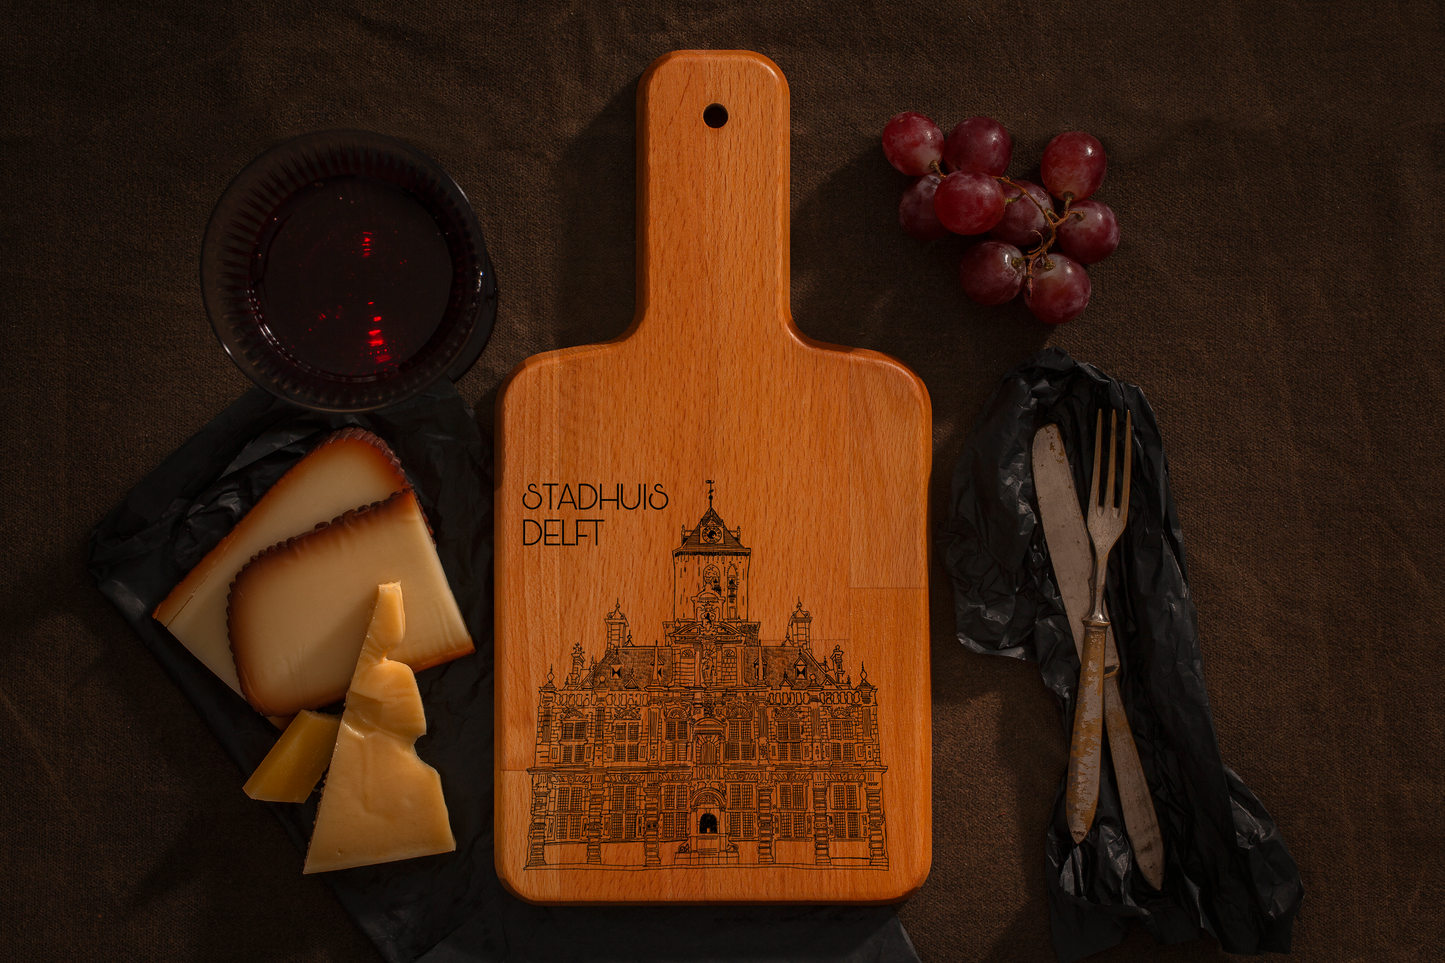 DELFT STUDHUIS CHEESE BOARD